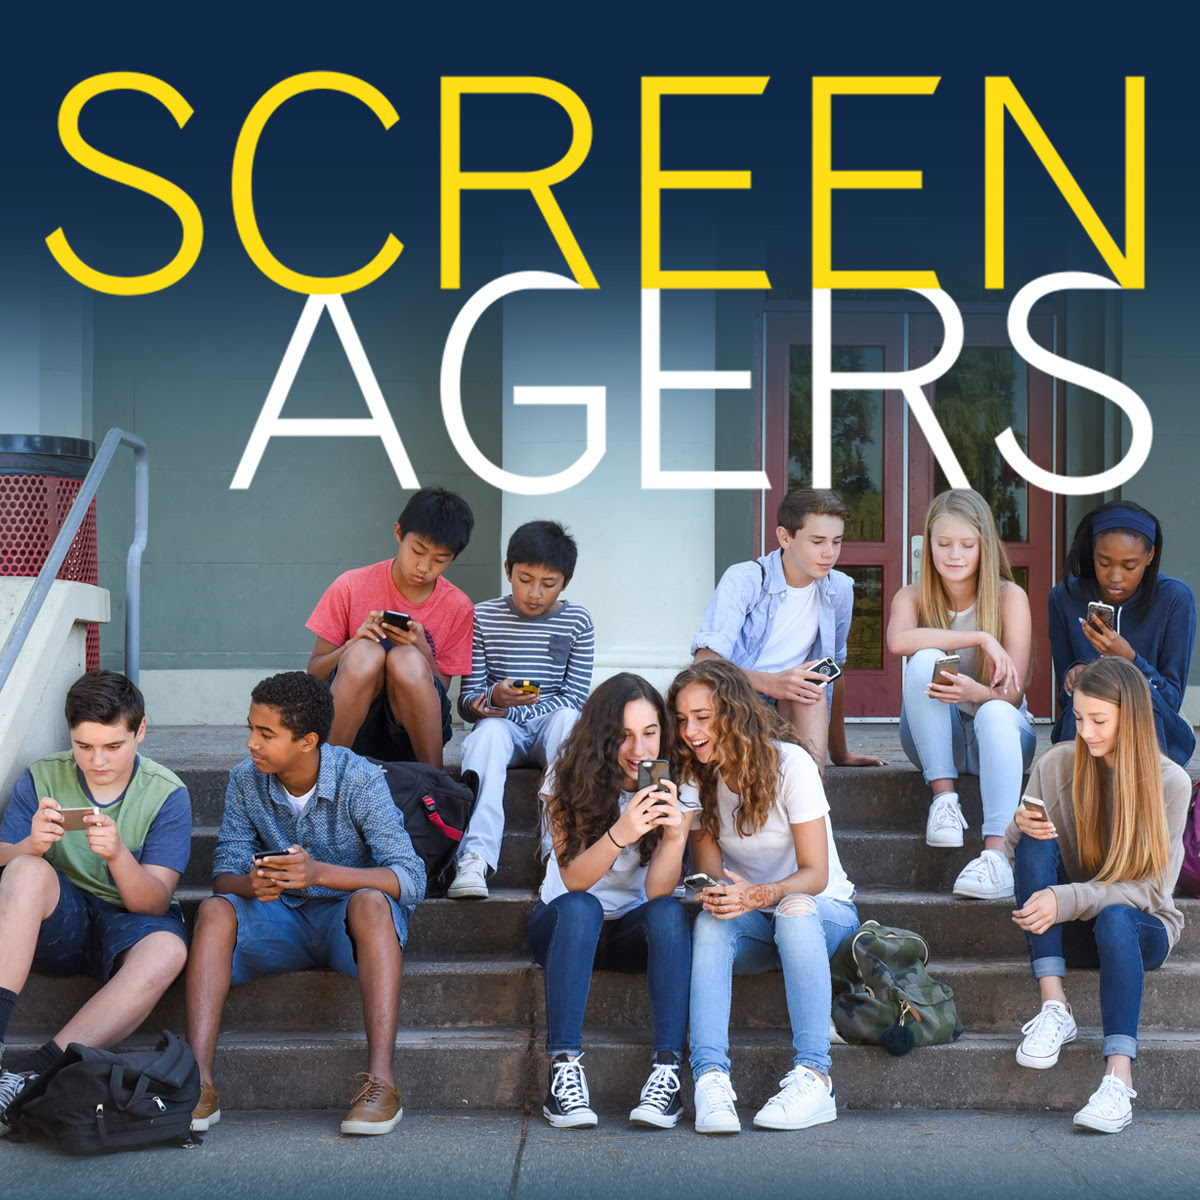 Screenagers Film Presented By Friends School of Baltimore